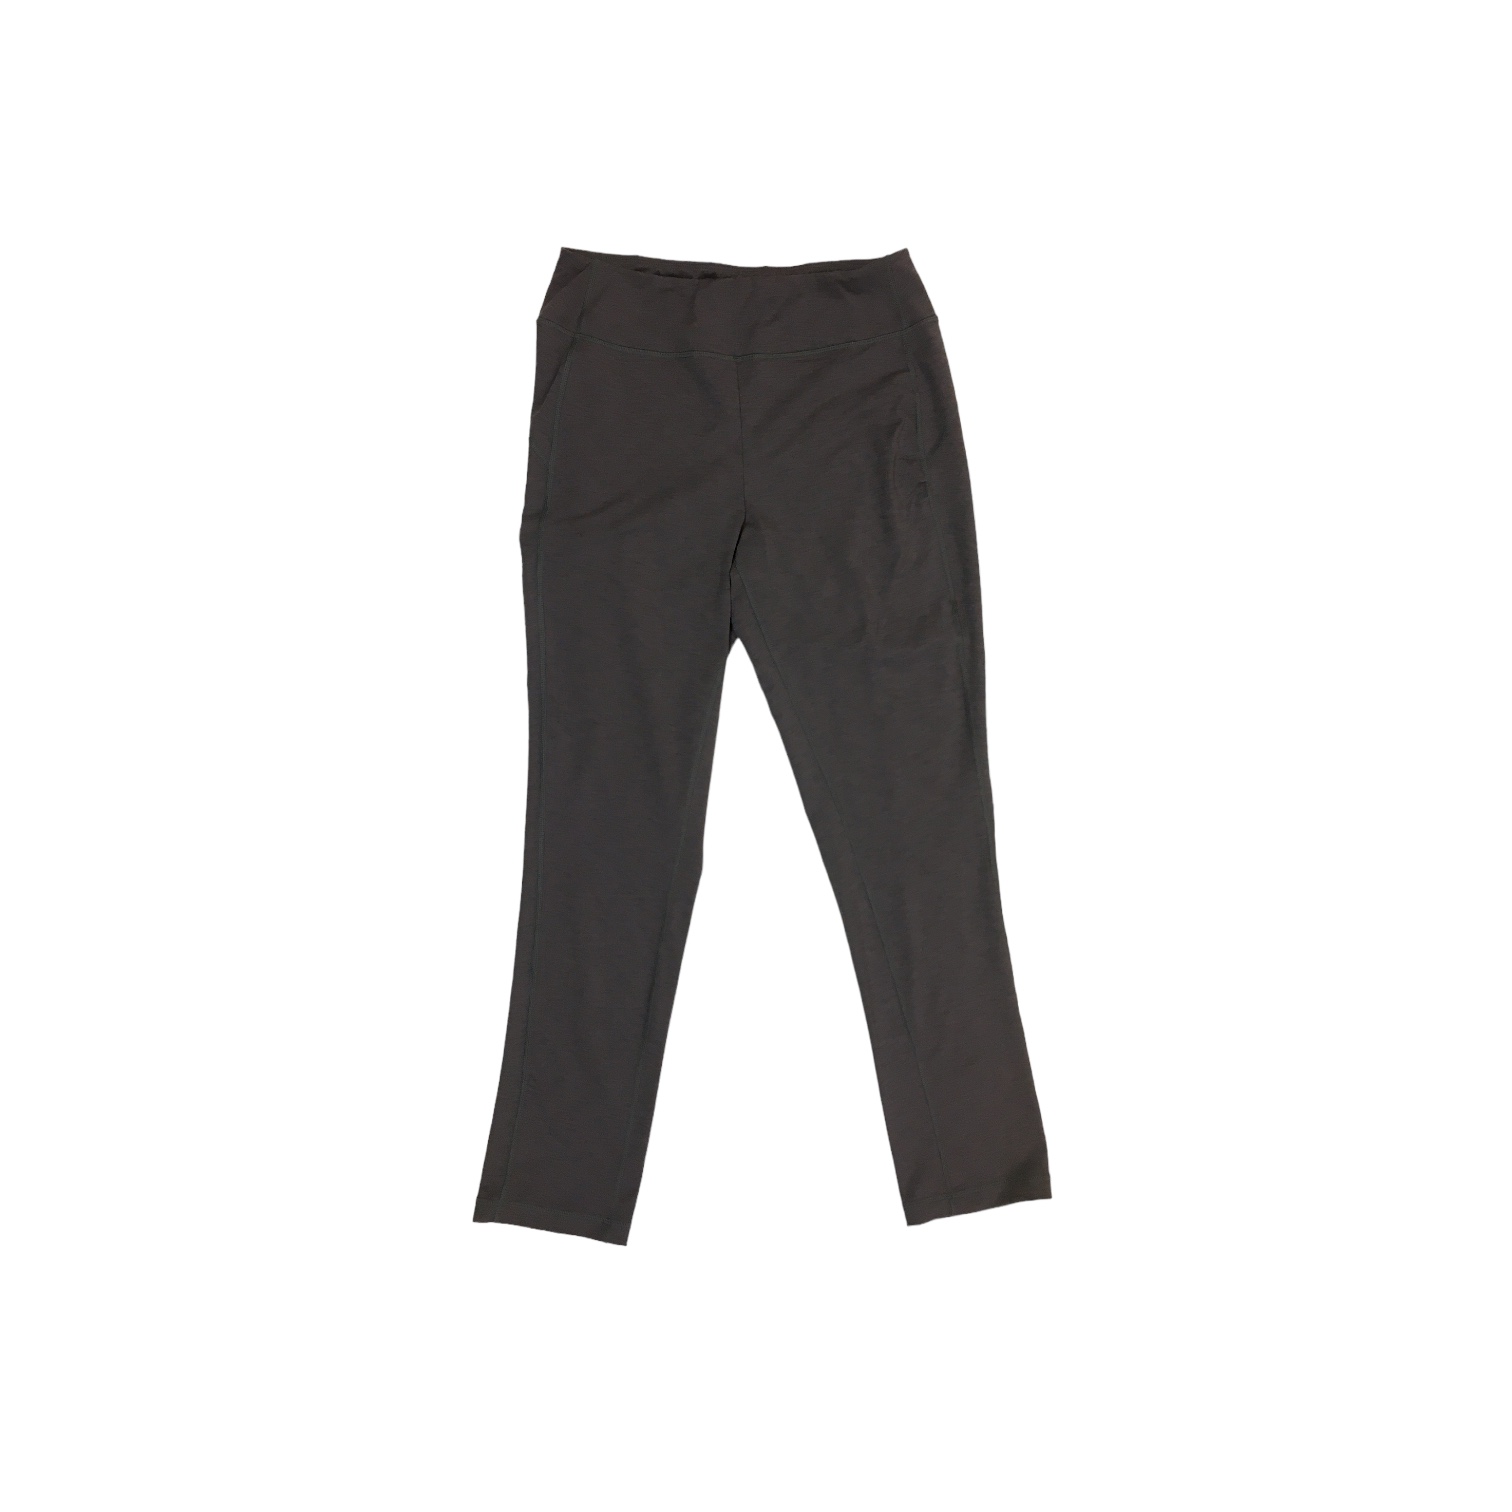 Wild Fable Black Size XS sweatpants – Share the Love Consignment